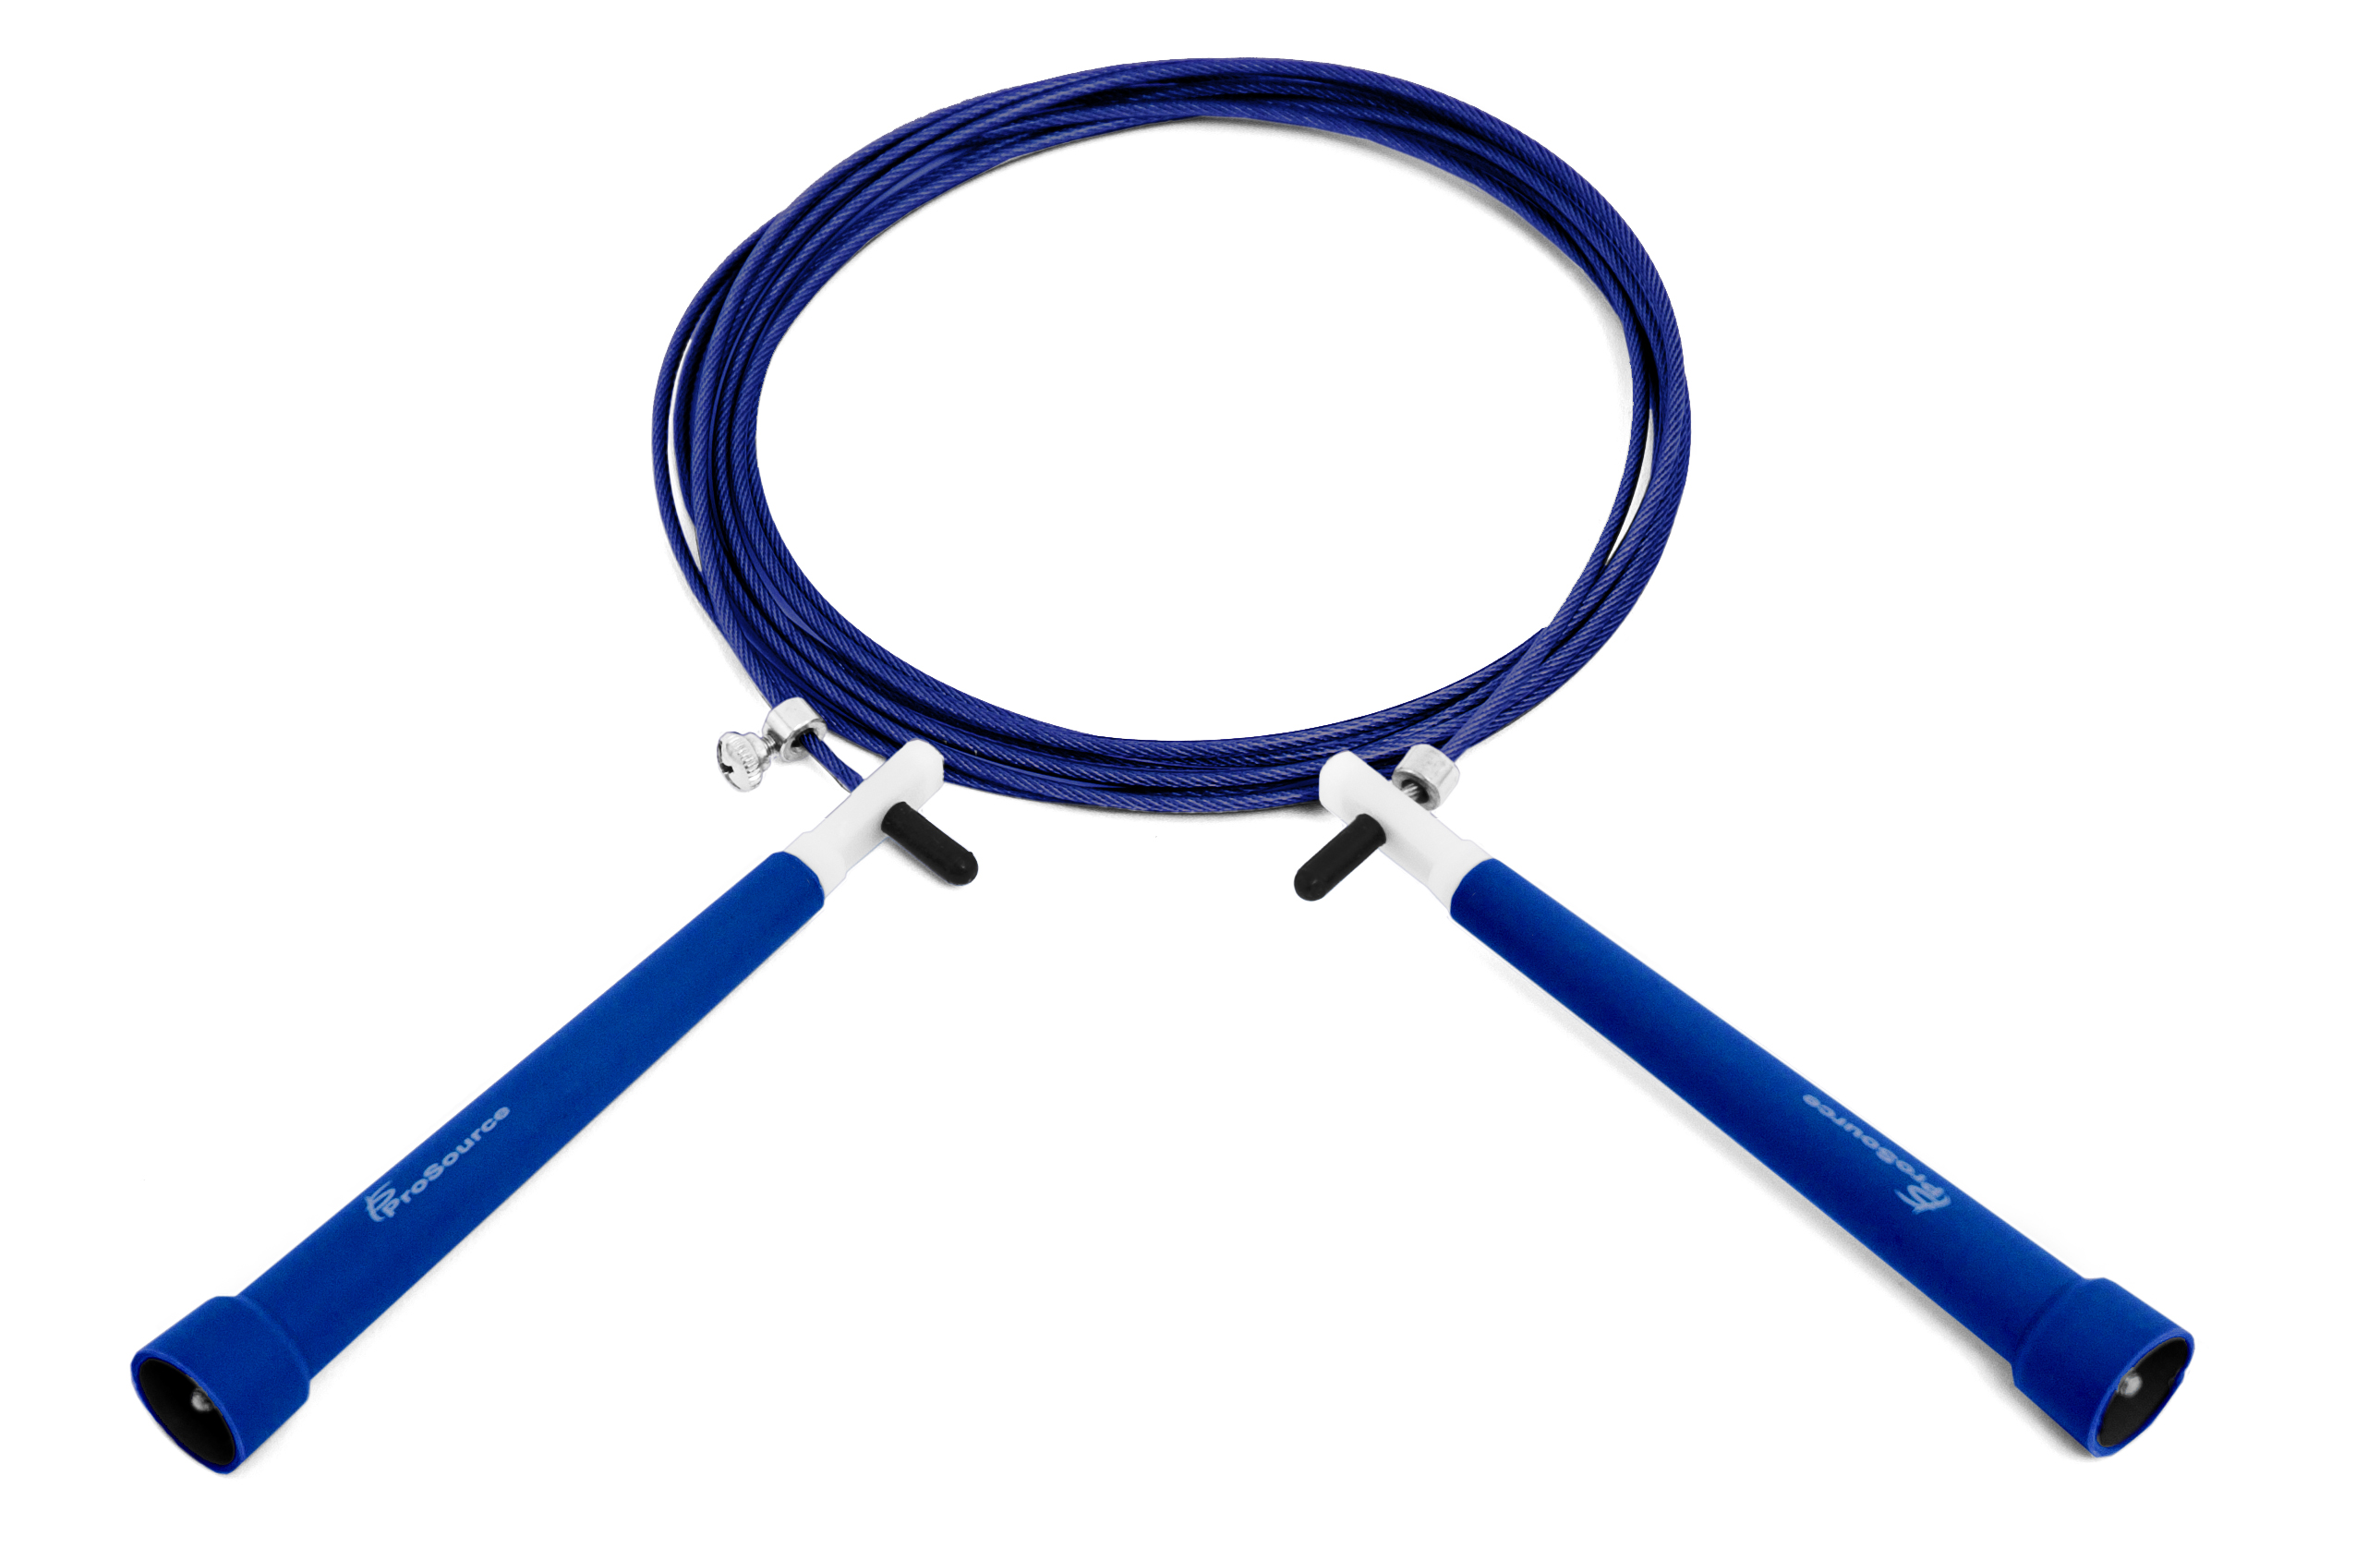 ProsourceFit Speed Jump Rope 10’ Fully Adjustable Super Fast Turning for Crossfit Cardio Boxing - Blue